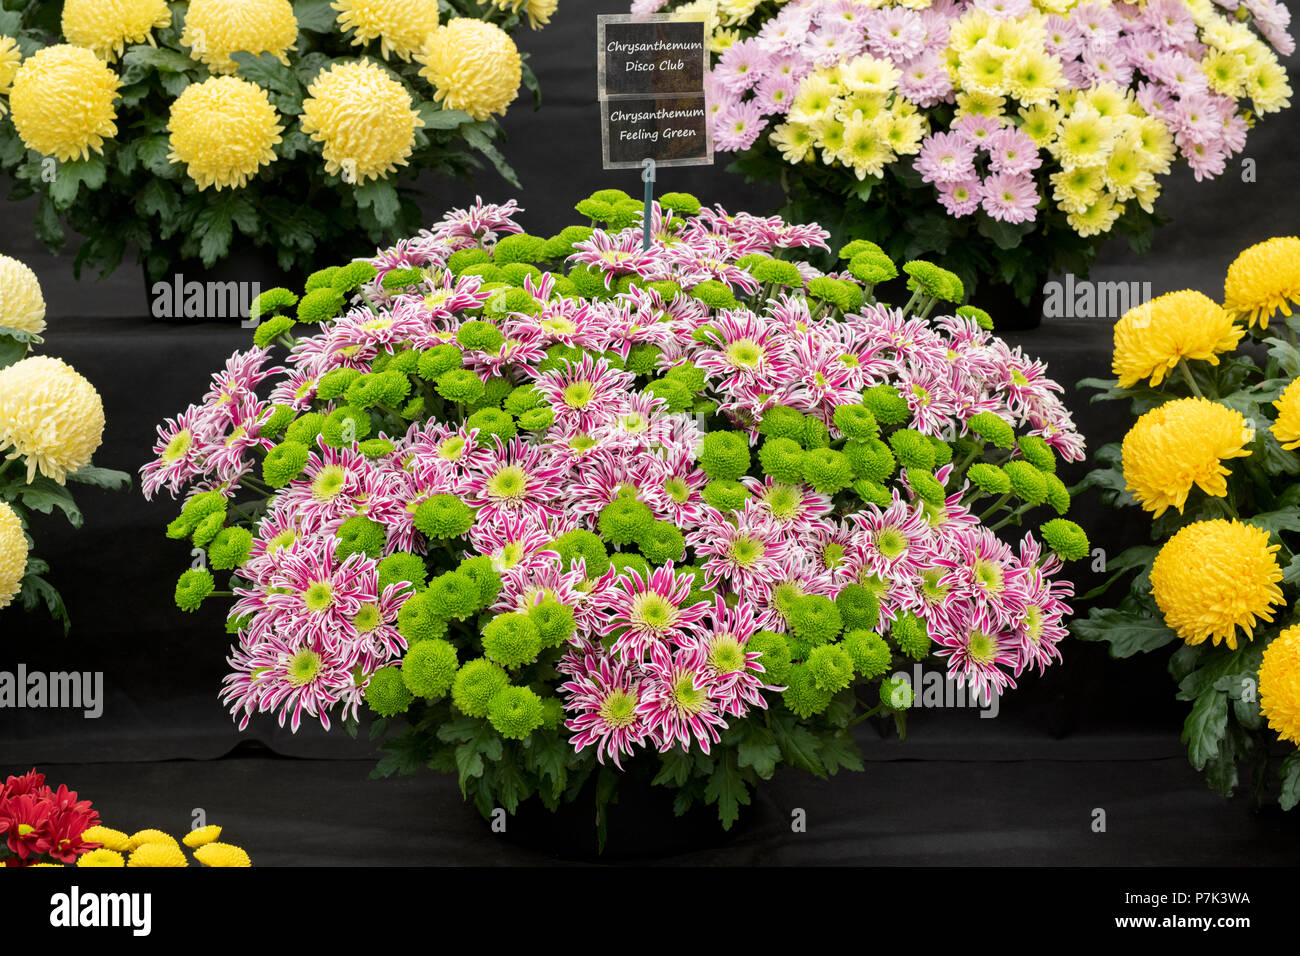 Chrysanthemum flower display inside the floral marquee at RHS Hampton court flower show 2018. London Stock Photo